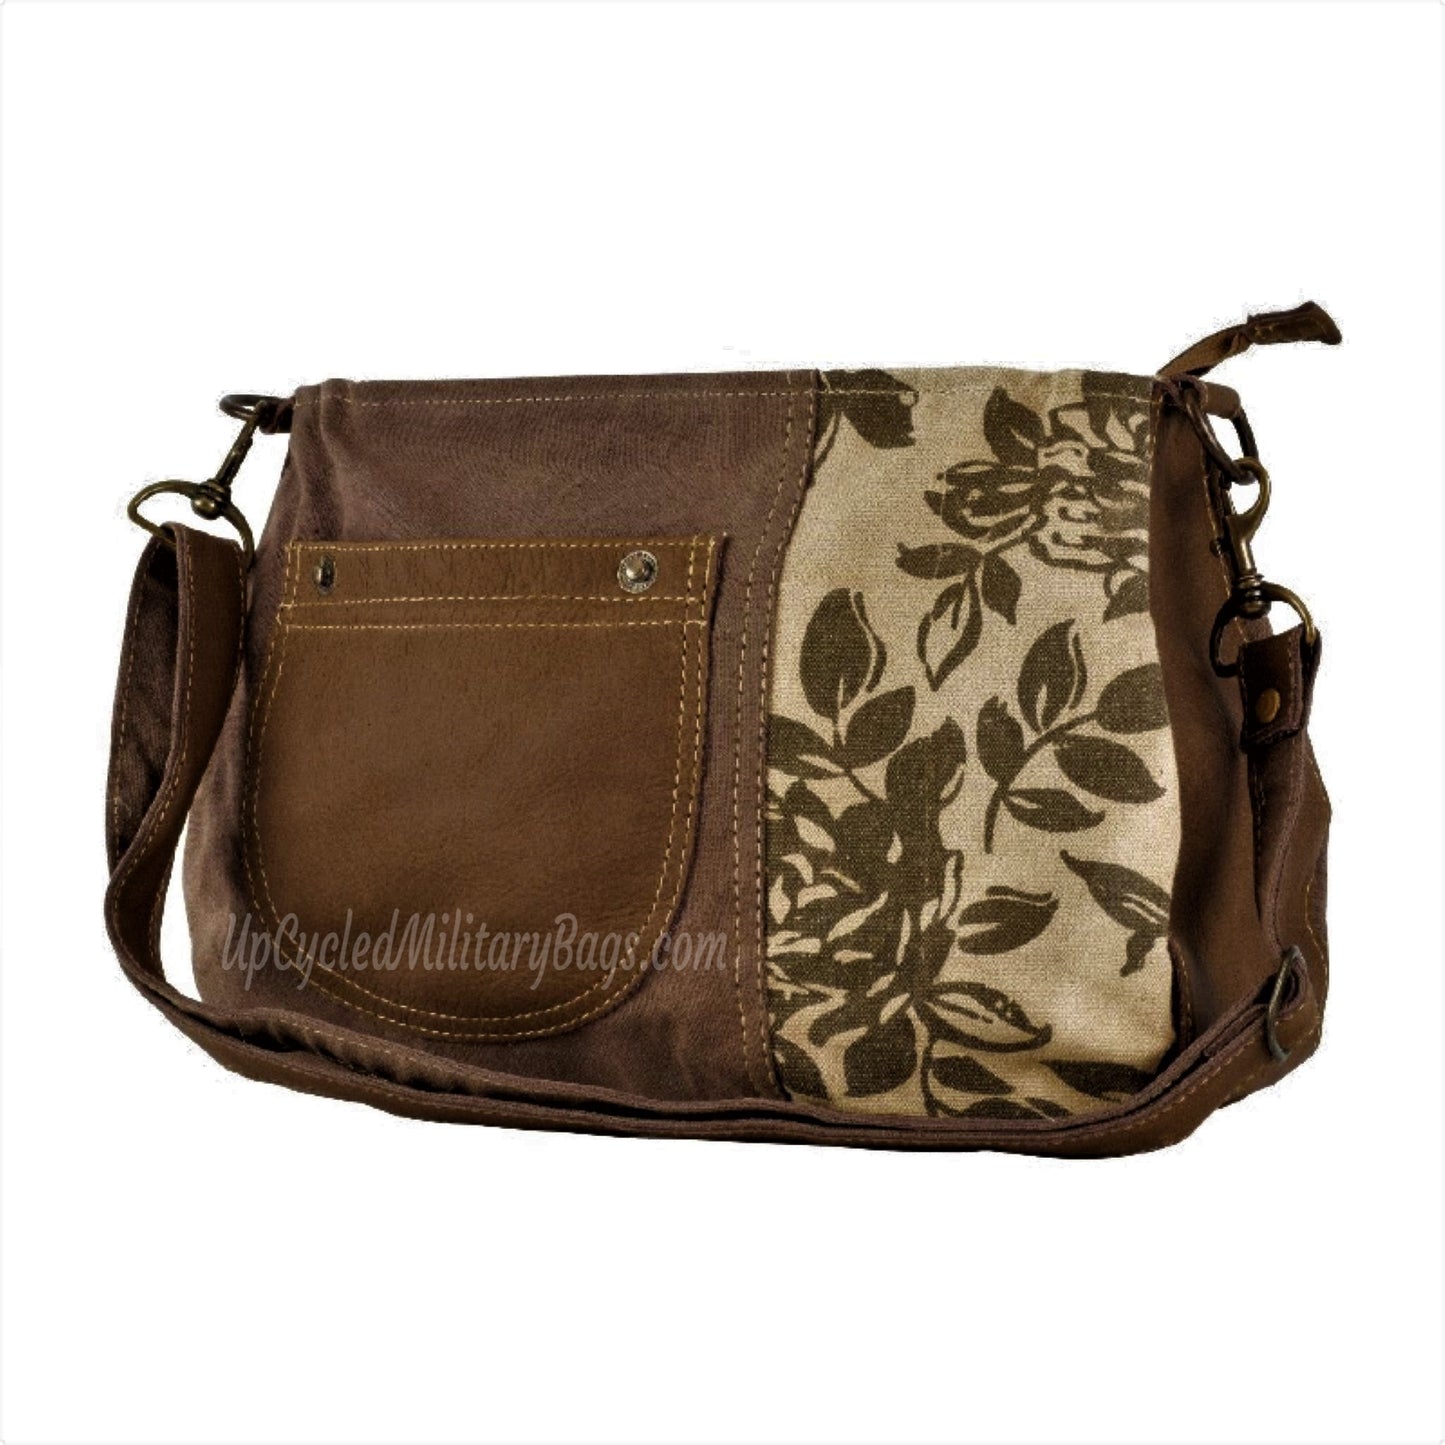 Floral Canvas with Leather Accents Shoulder Bag or Crossbody Purse